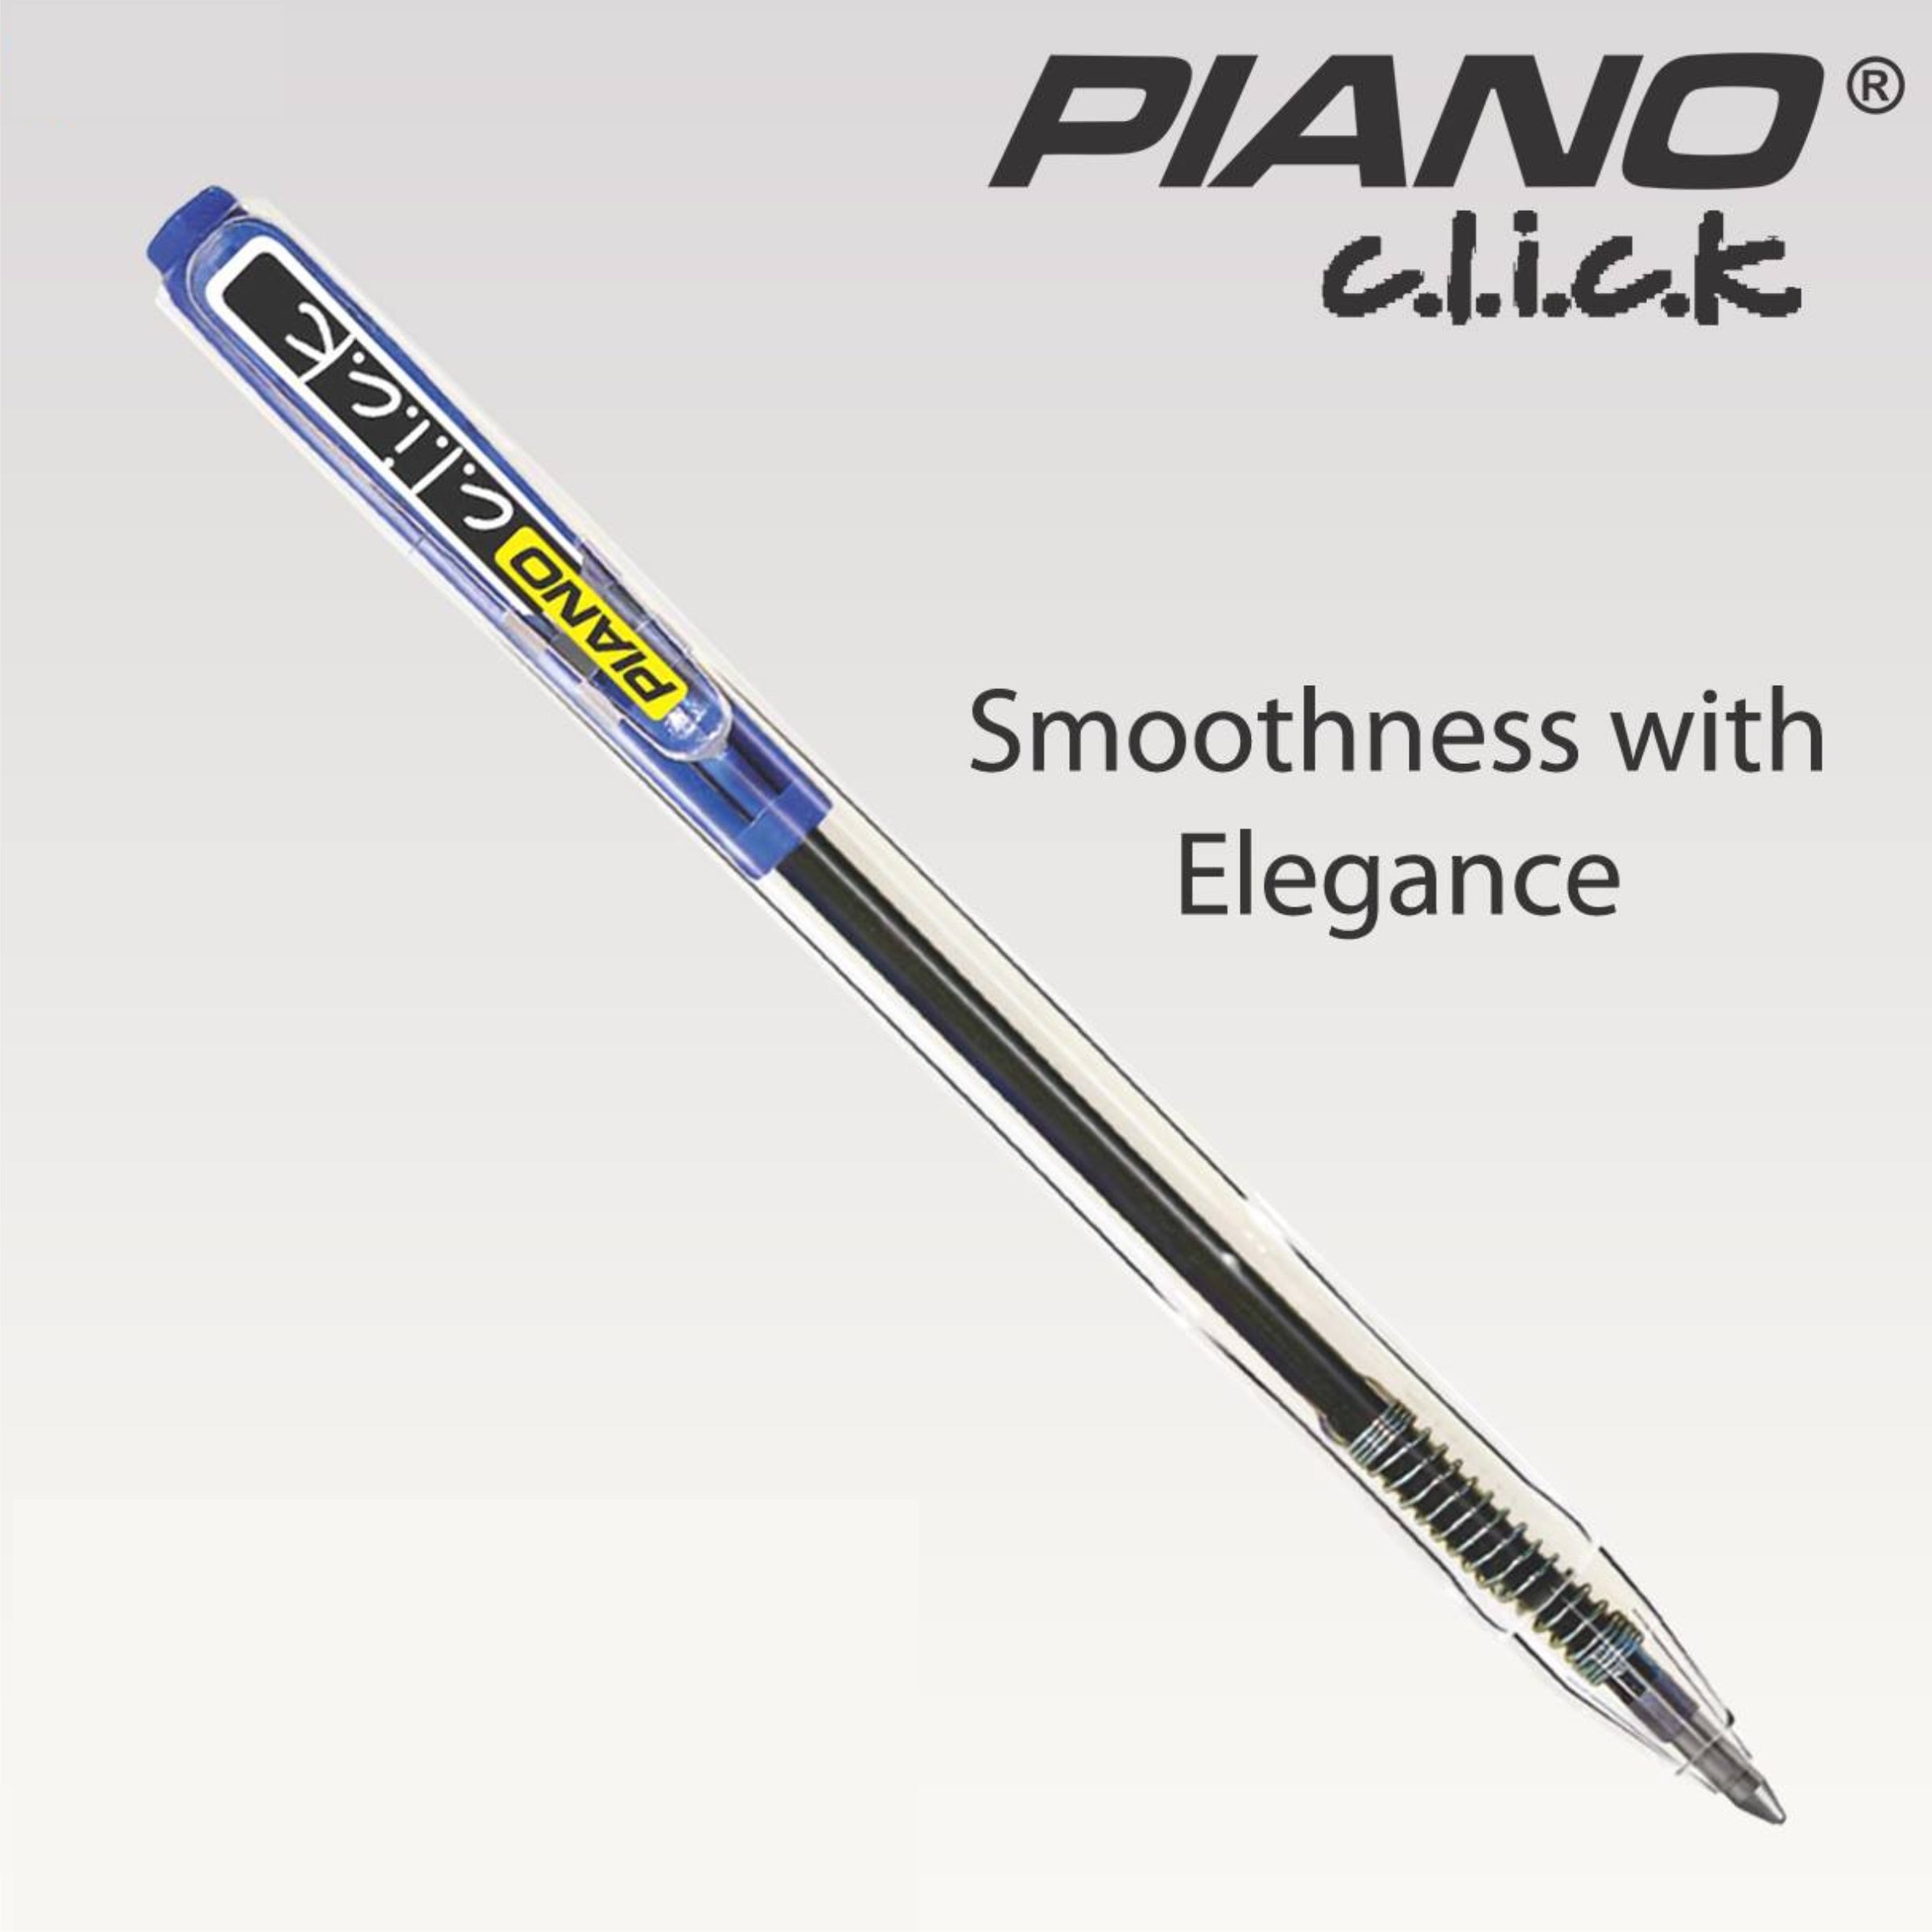 Piano Click Sky Ballpoint Pen Pack of 10